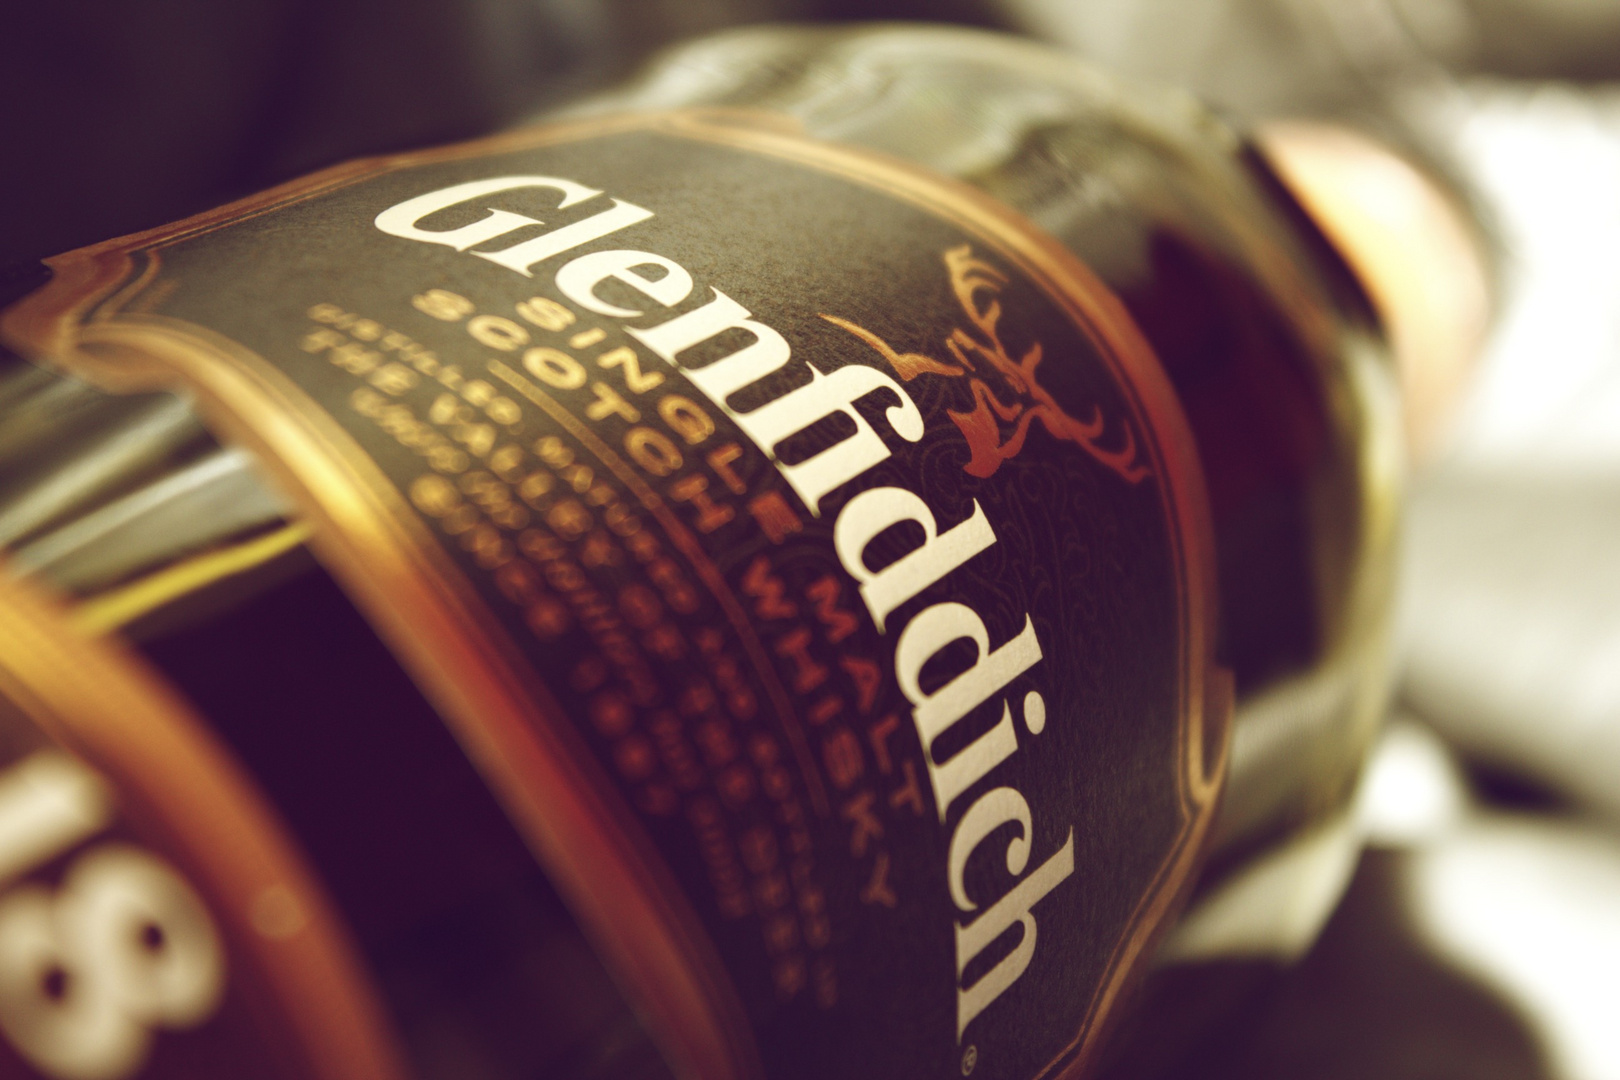 Glenfiddich 18 years old